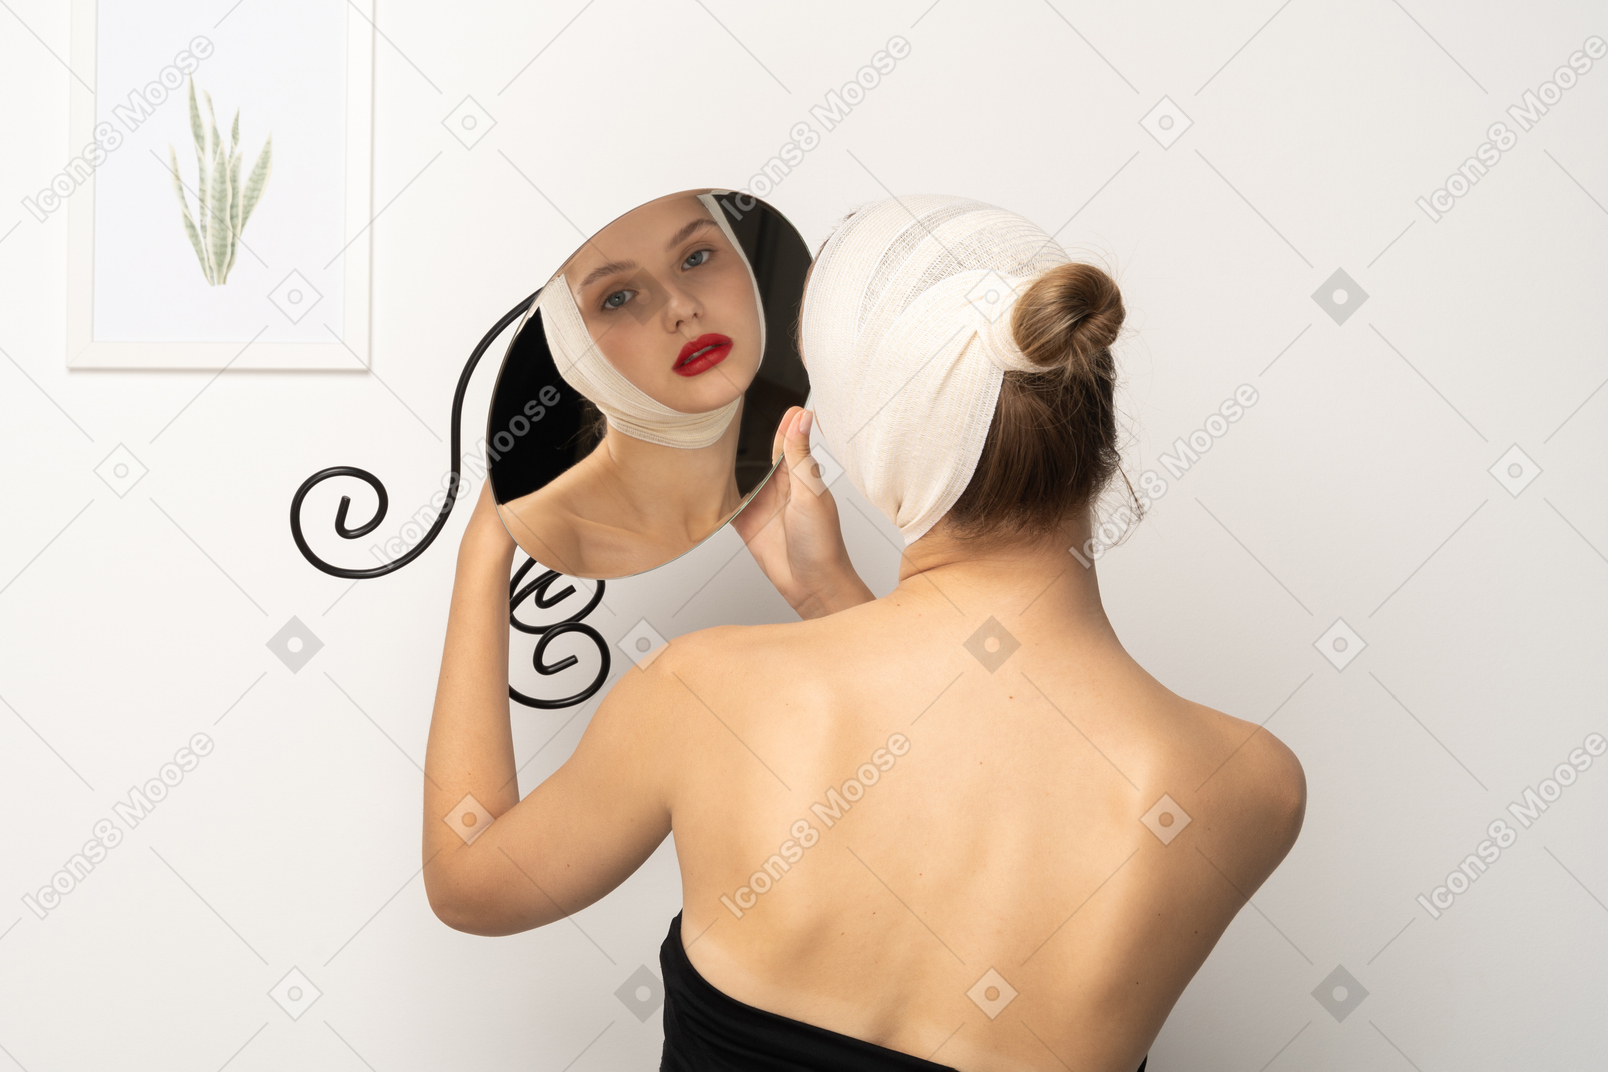 Young woman with bandaged head holding up a mirror